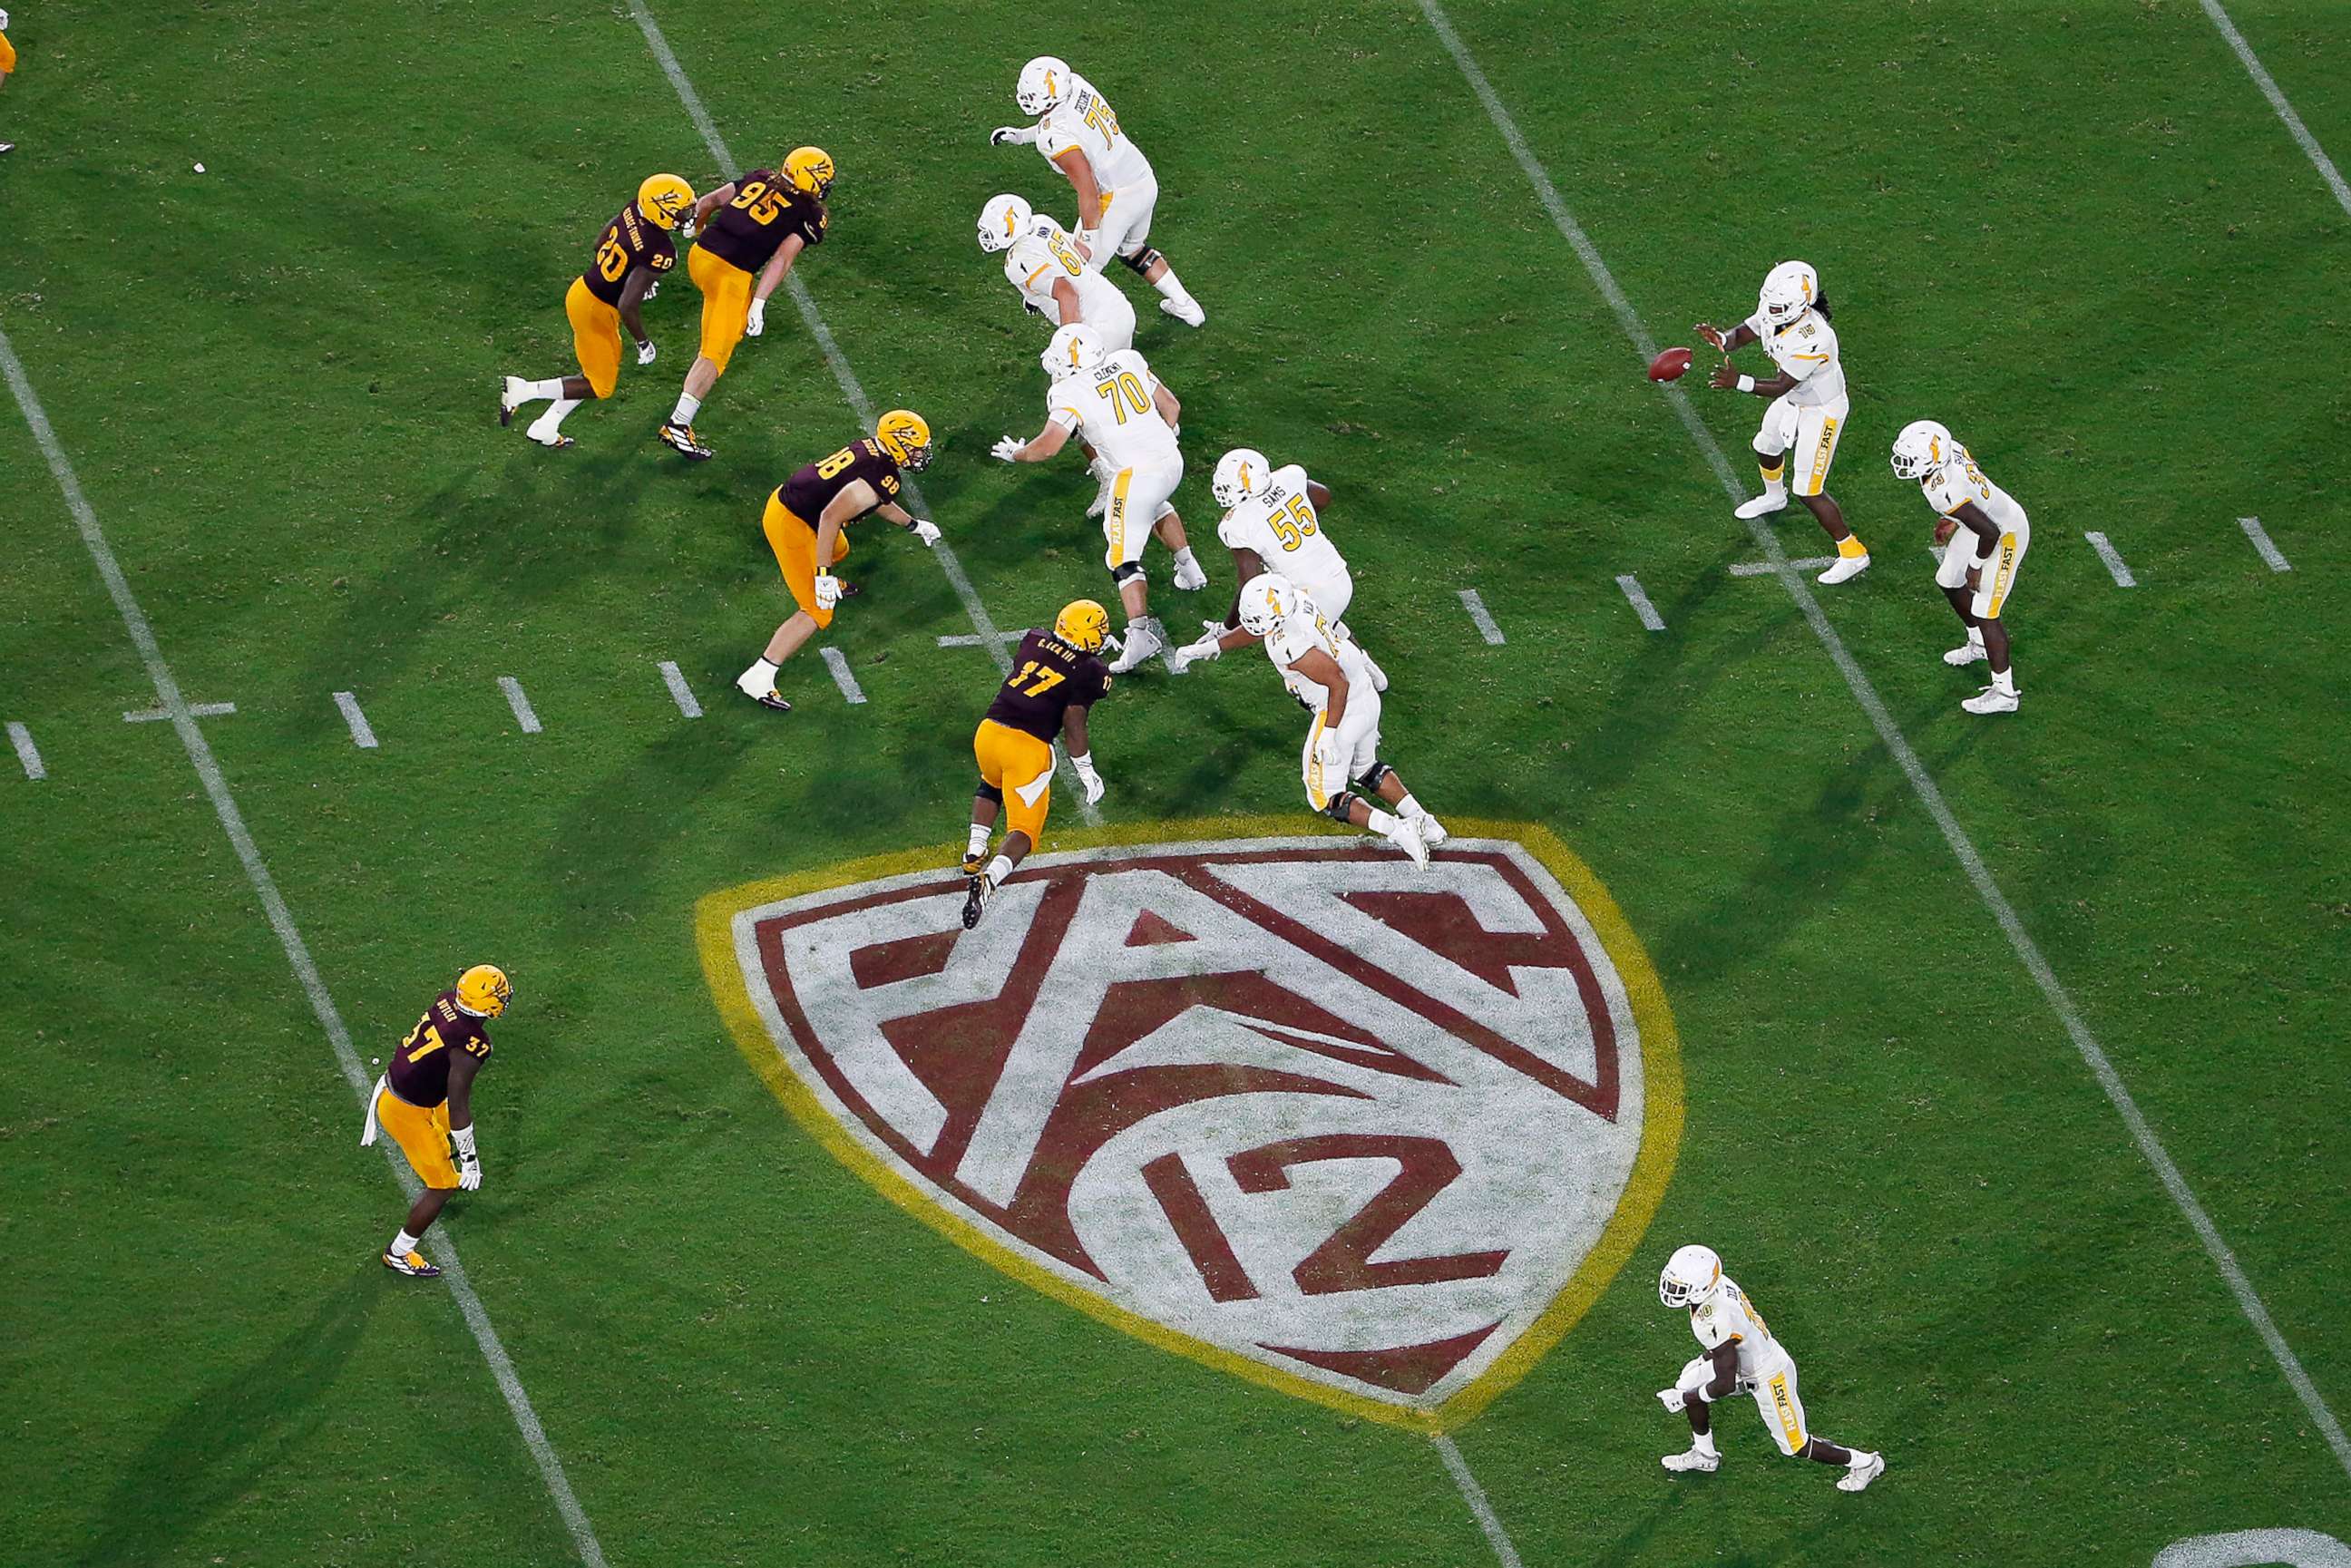 PHOTO: The Pac-12 logo during the second half of an NCAA college football game between Arizona State and Kent State, in Tempe, Ariz.